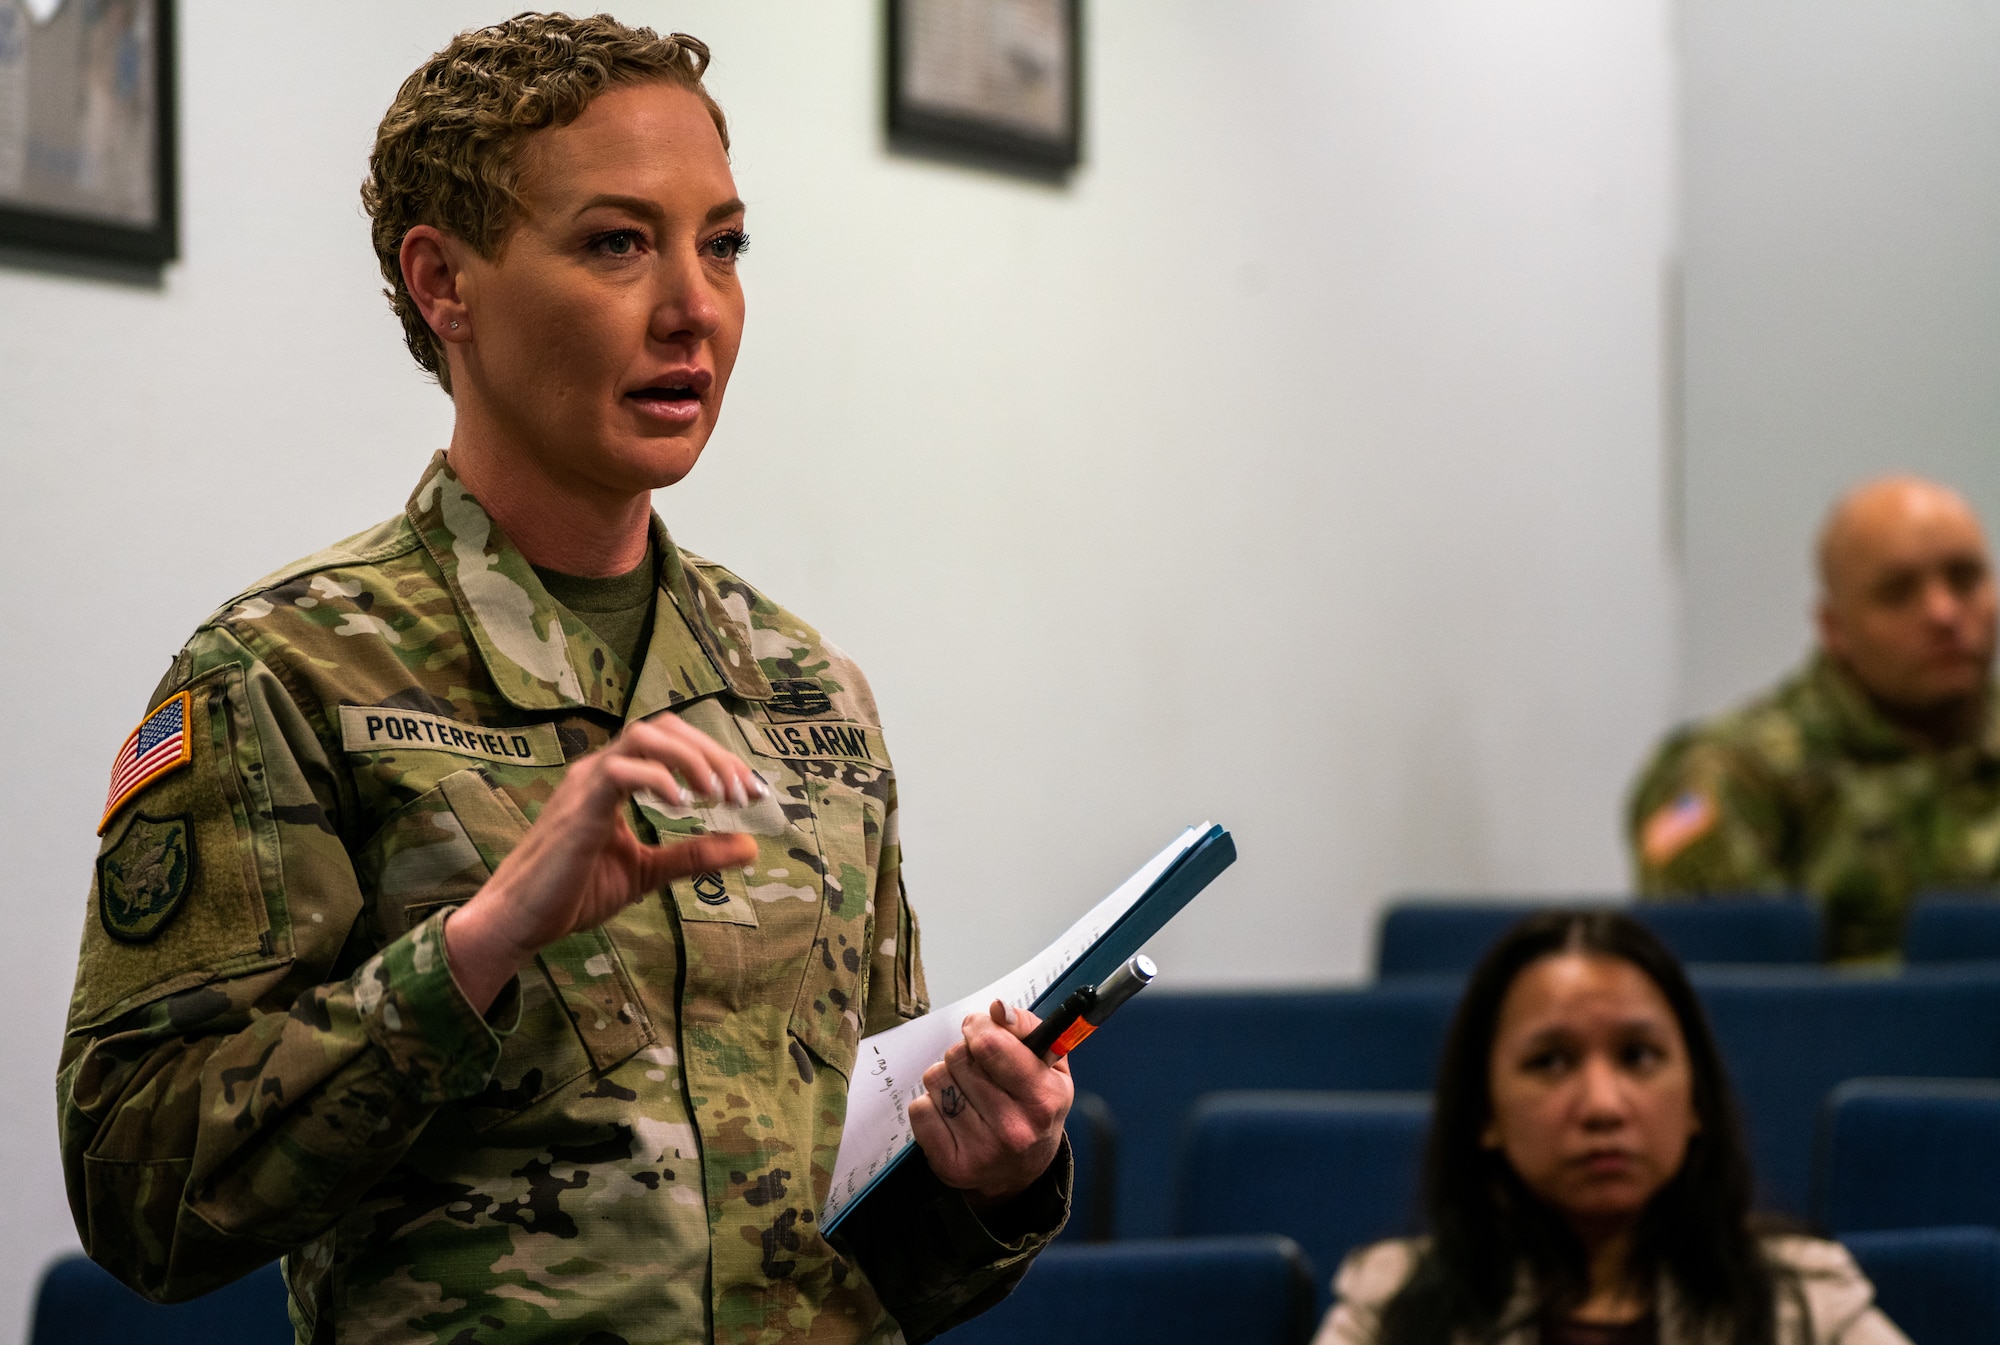 The second annual Women's Leadership Forum was held jointly at the Nevada Air National Guard Base and at the Las Vegas Readiness Center, March 4, 2022. The event allowed participants to listen to military and civilian women leaders discuss topics such as leadership, challenges, mentorship and career development. (U.S. Air National Guard photo by Senior Airman Michelle Brooks)